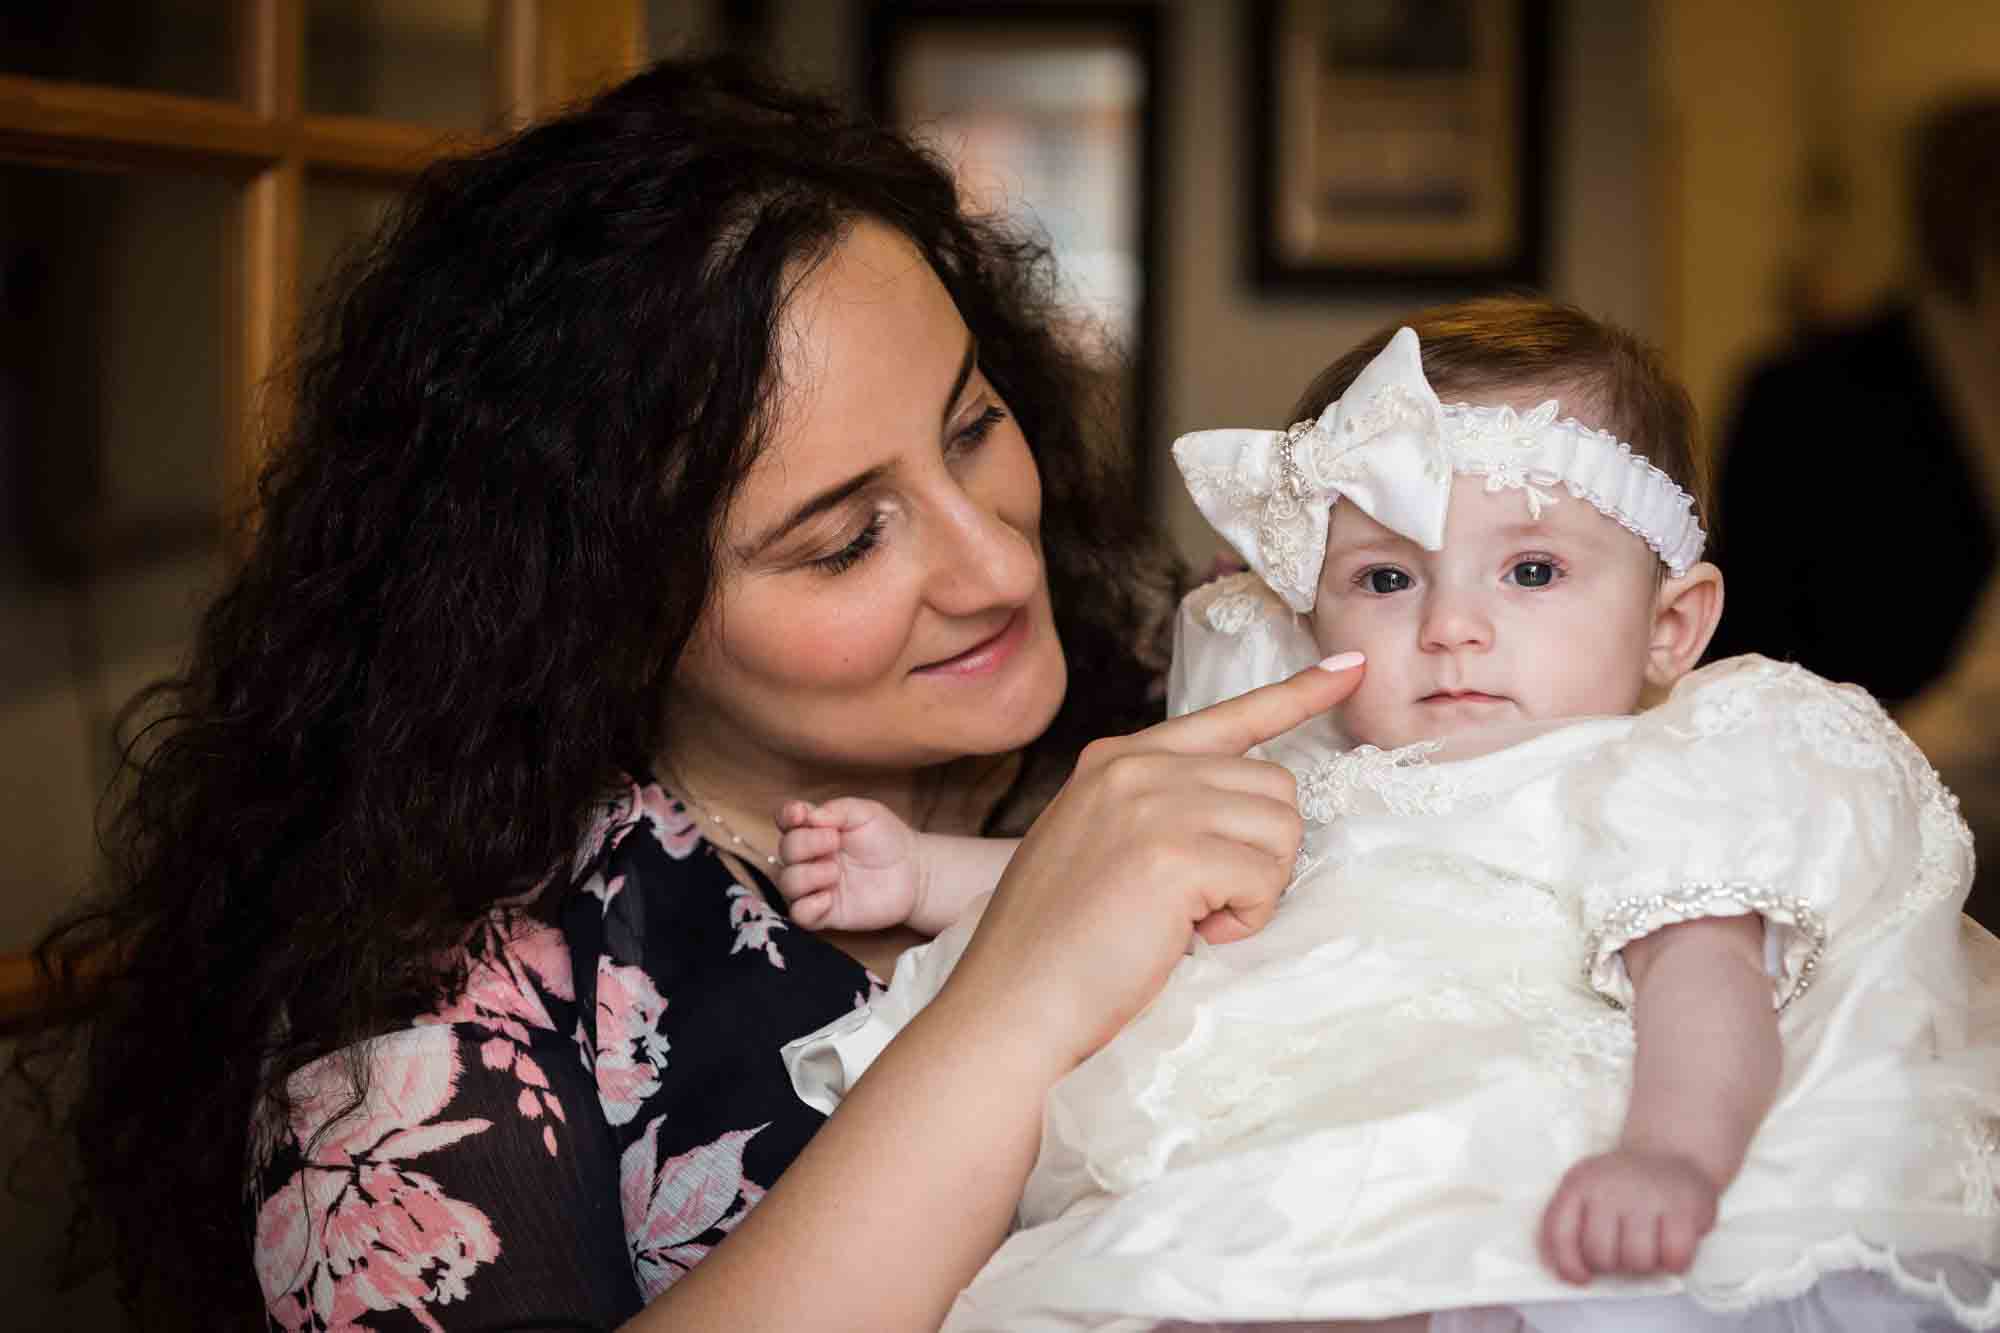 Mother touching nose of baby girl wearing white baptism dress and hair bow